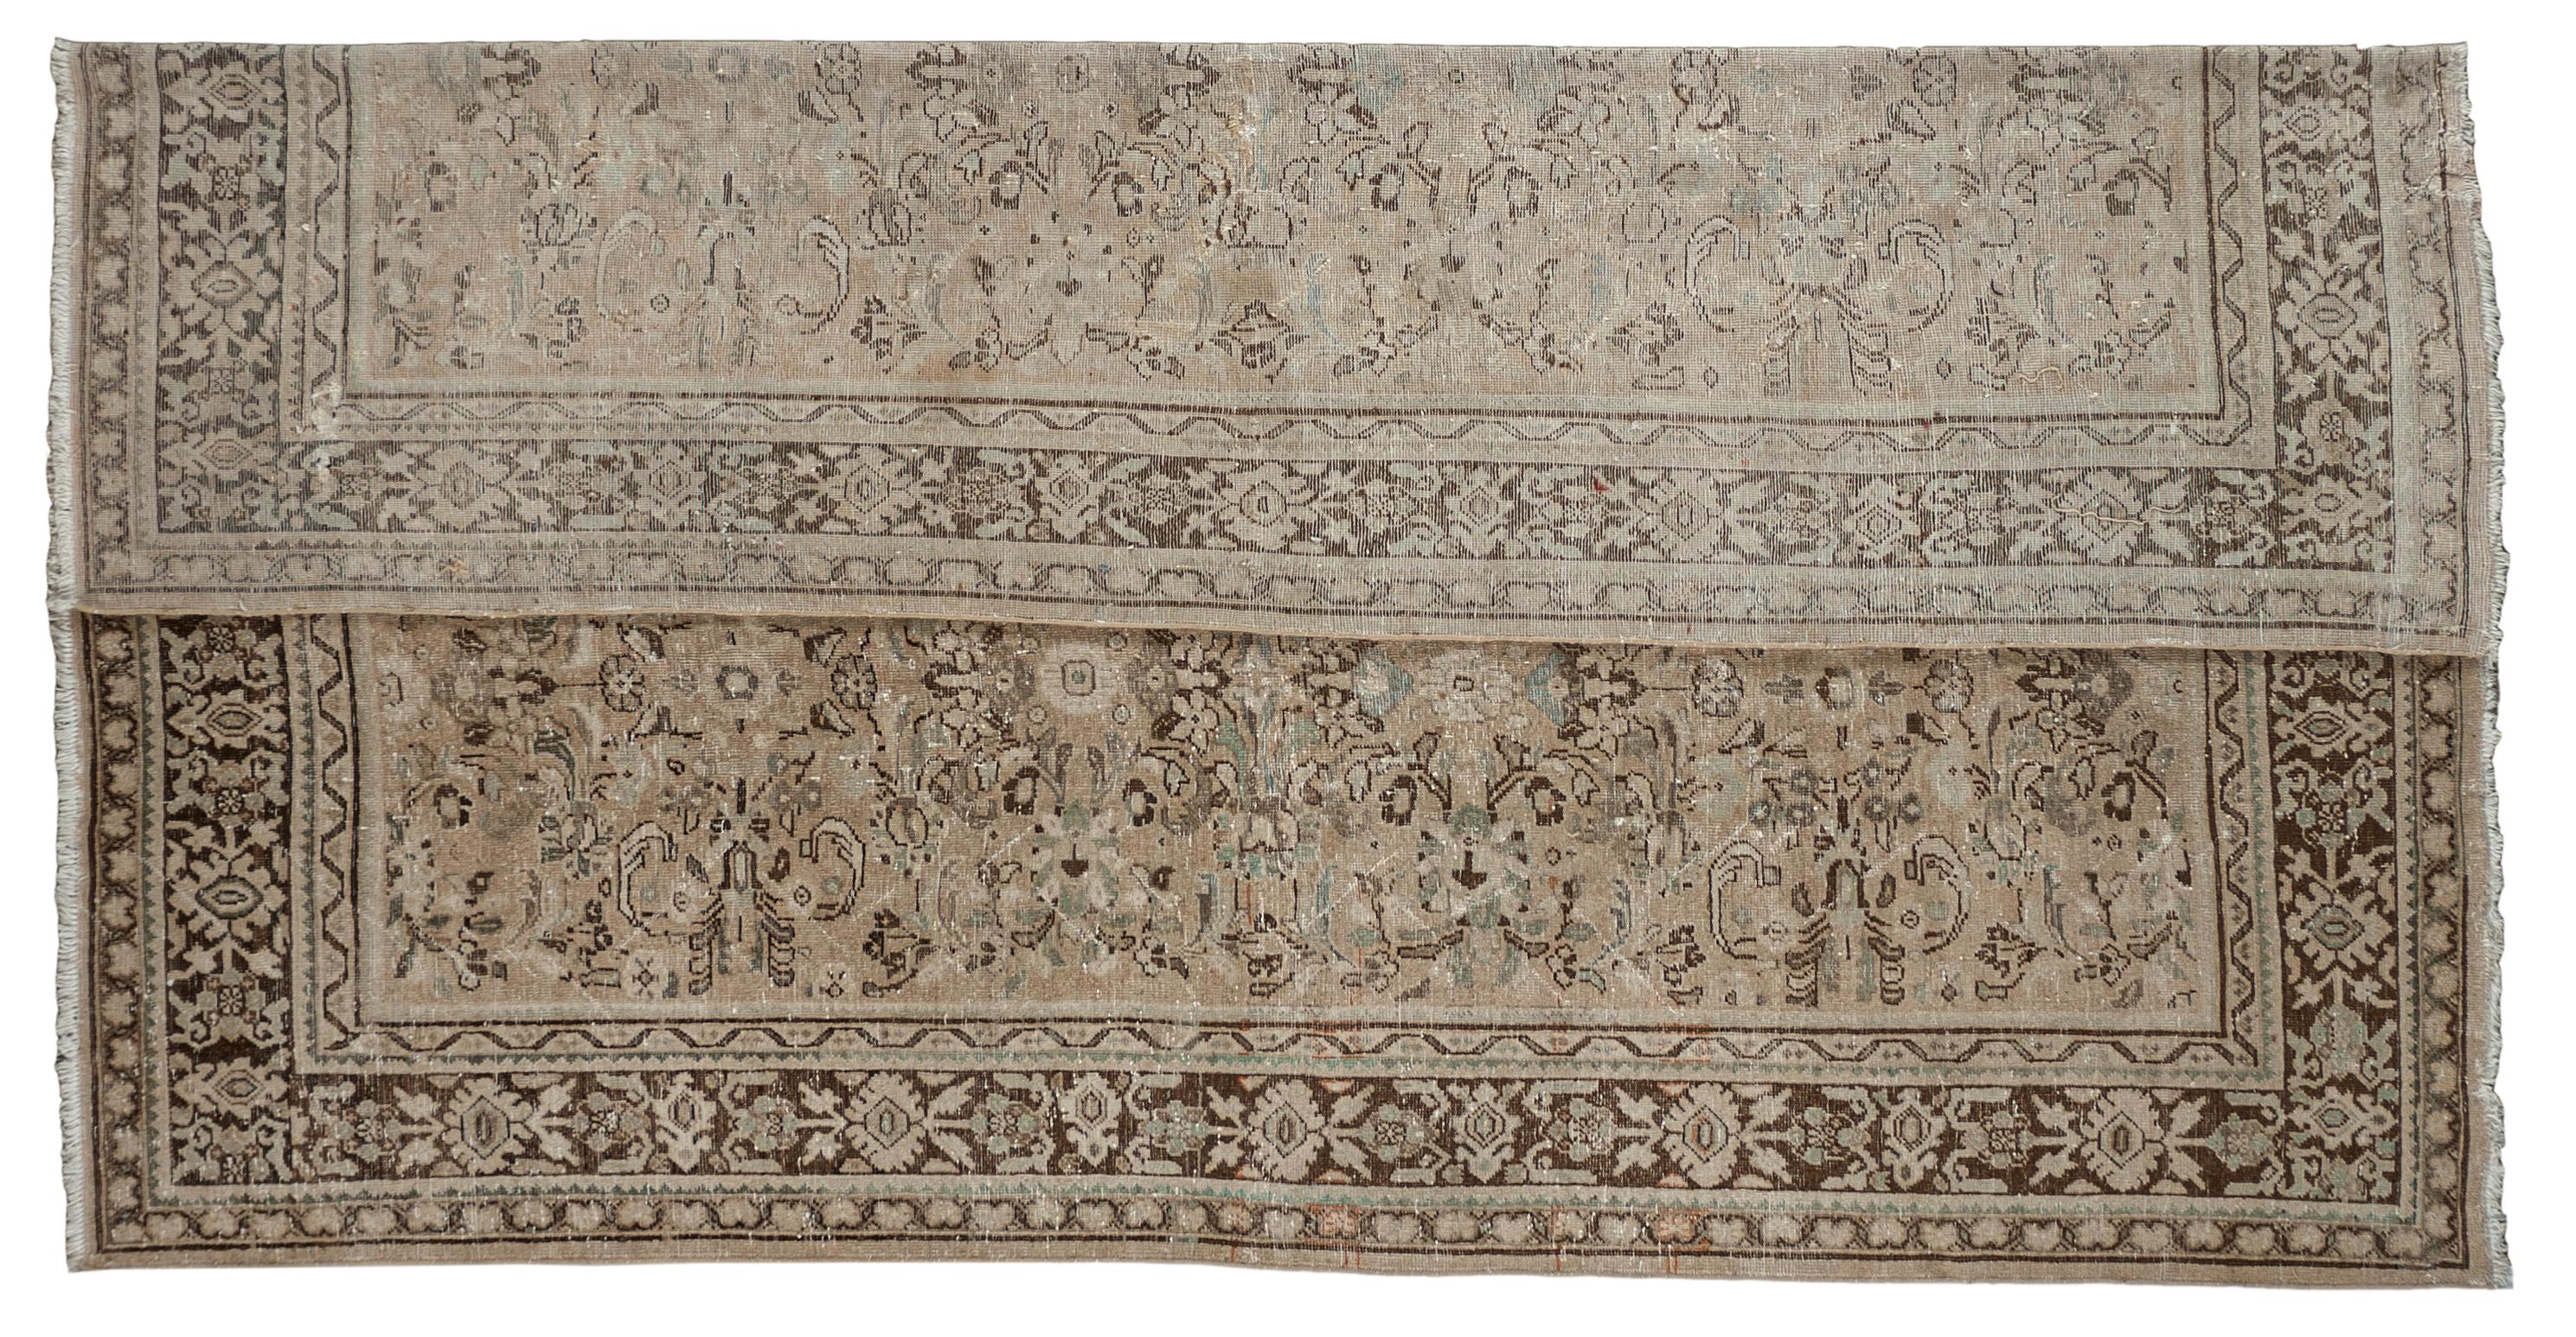 This antique distressed Mahal is an all wool handmade and hand knotted rug. It has an all over design from the 20th century and was made in Iran. The name is derived from the Mahallat village where the rugs were crafted, and they are characterized